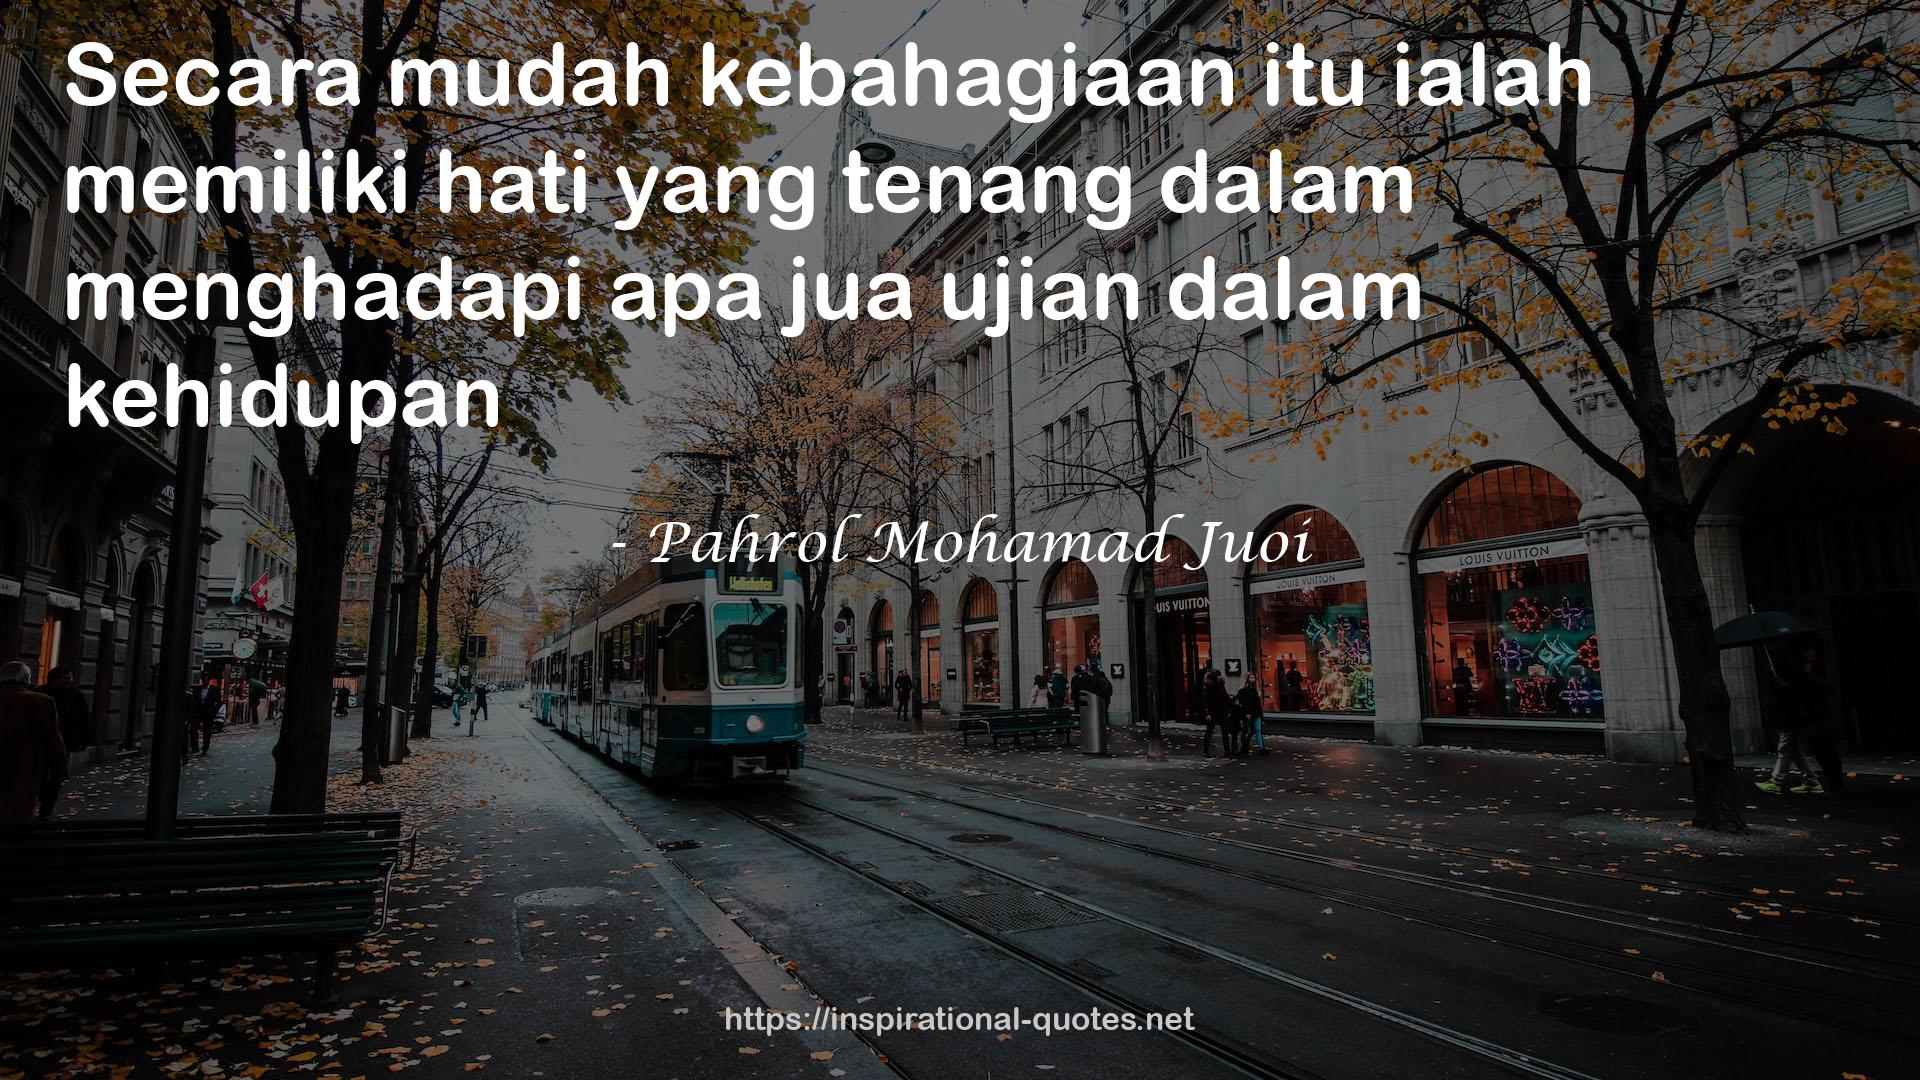 Pahrol Mohamad Juoi QUOTES